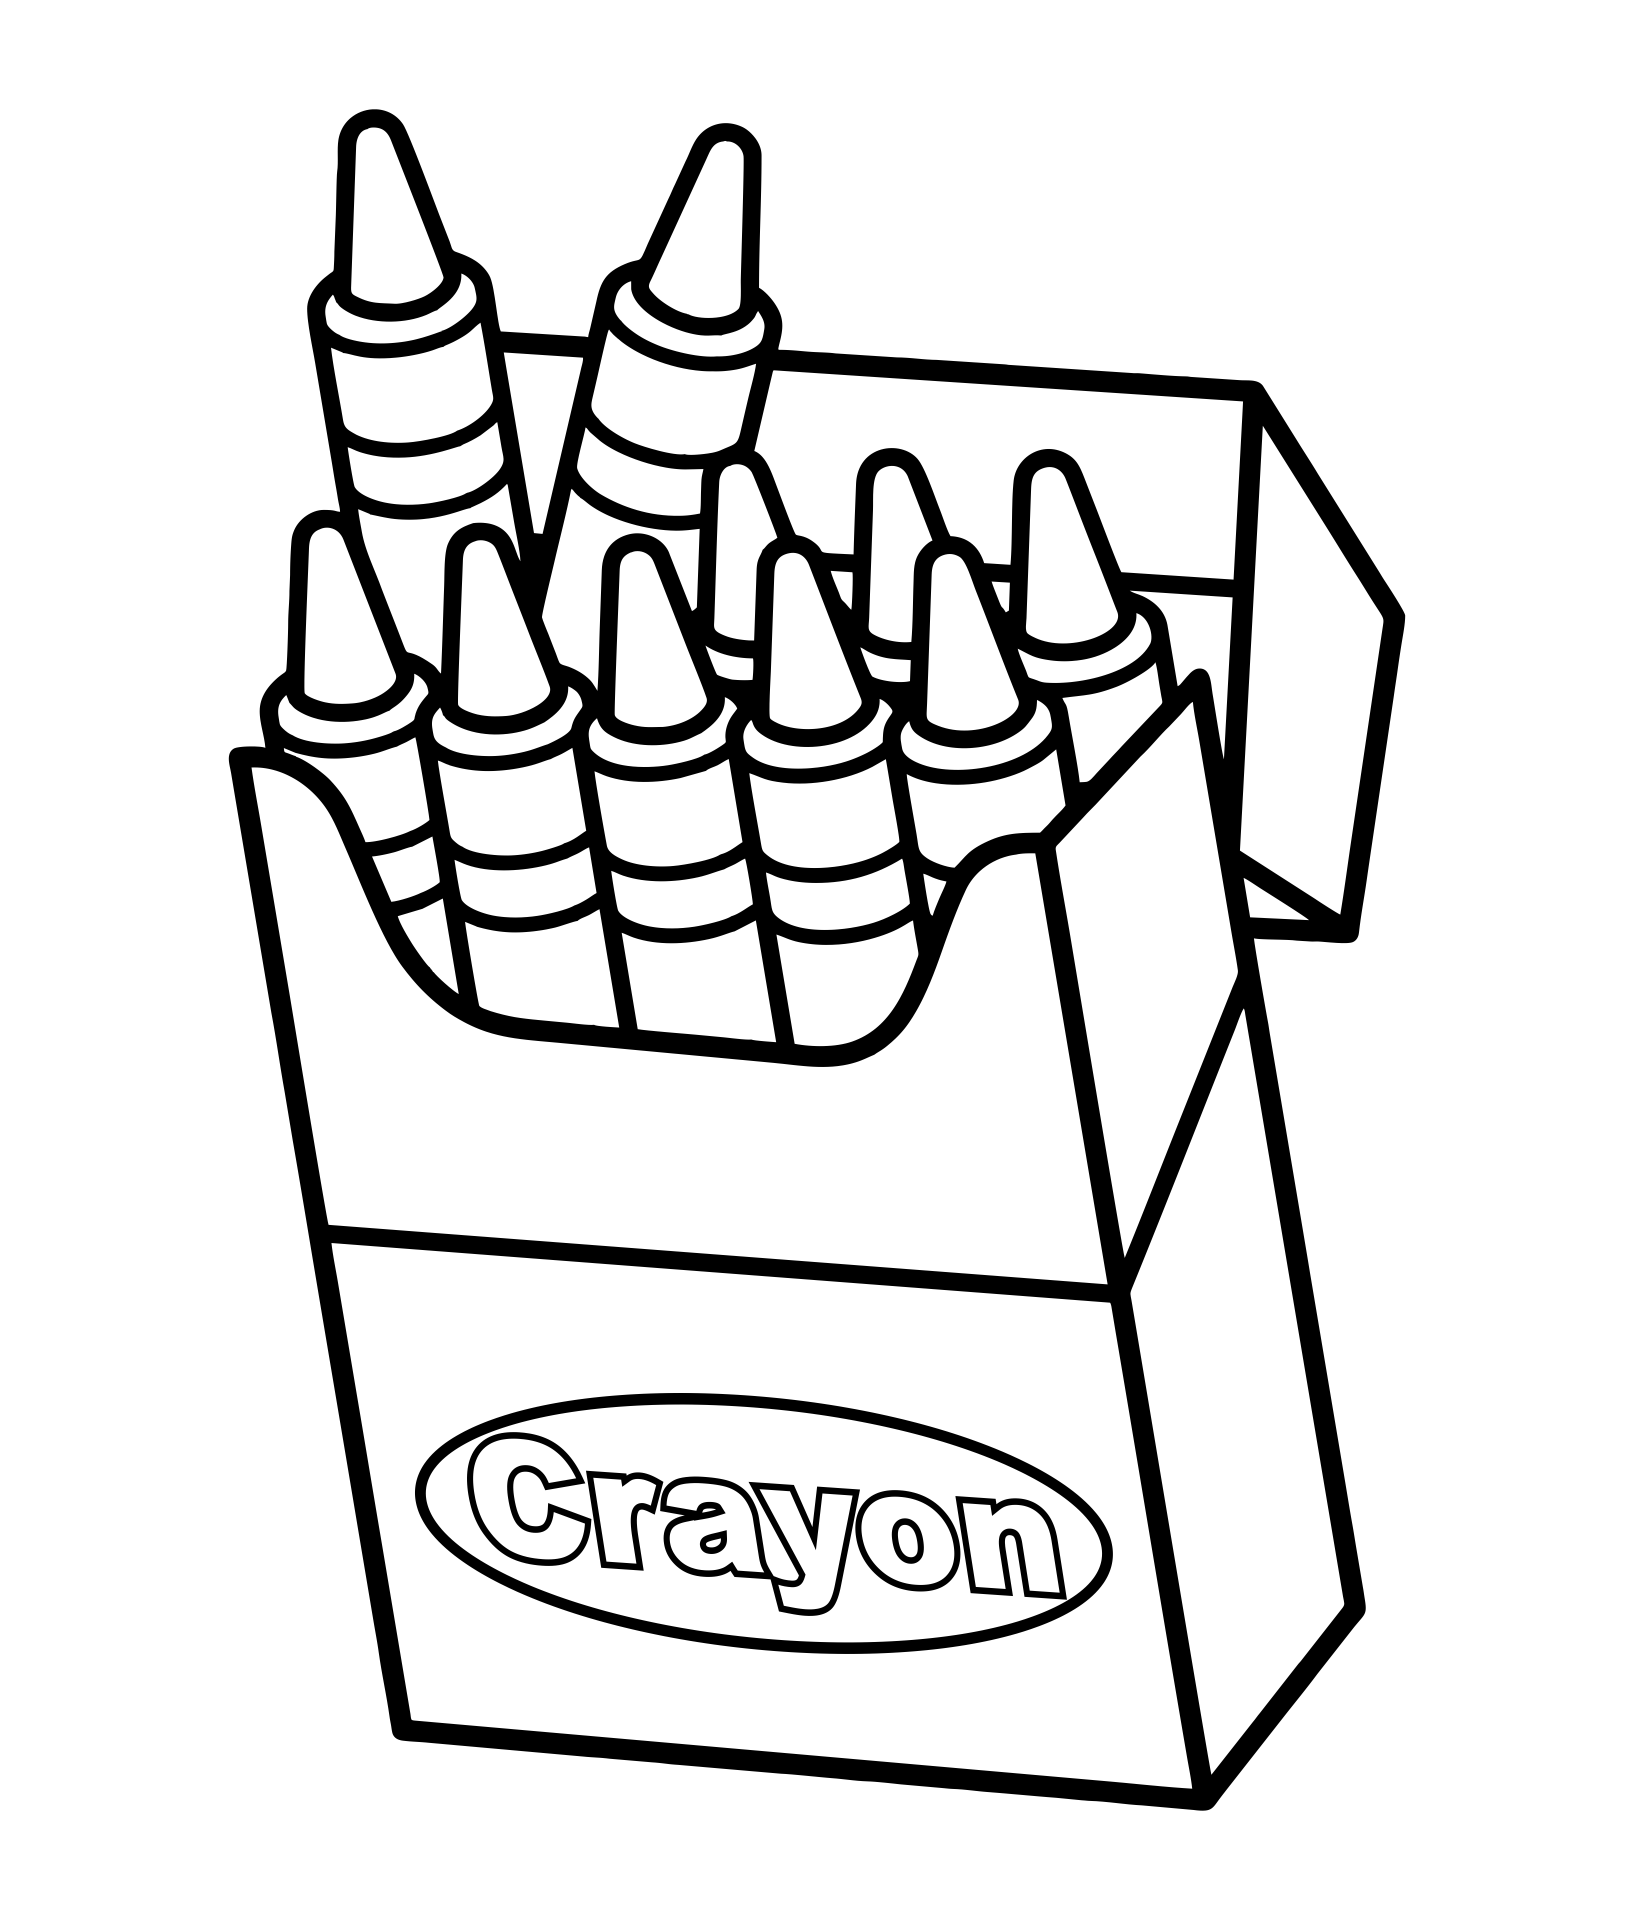 happy-crayons-coloring-page-free-printable-coloring-pages-for-kids